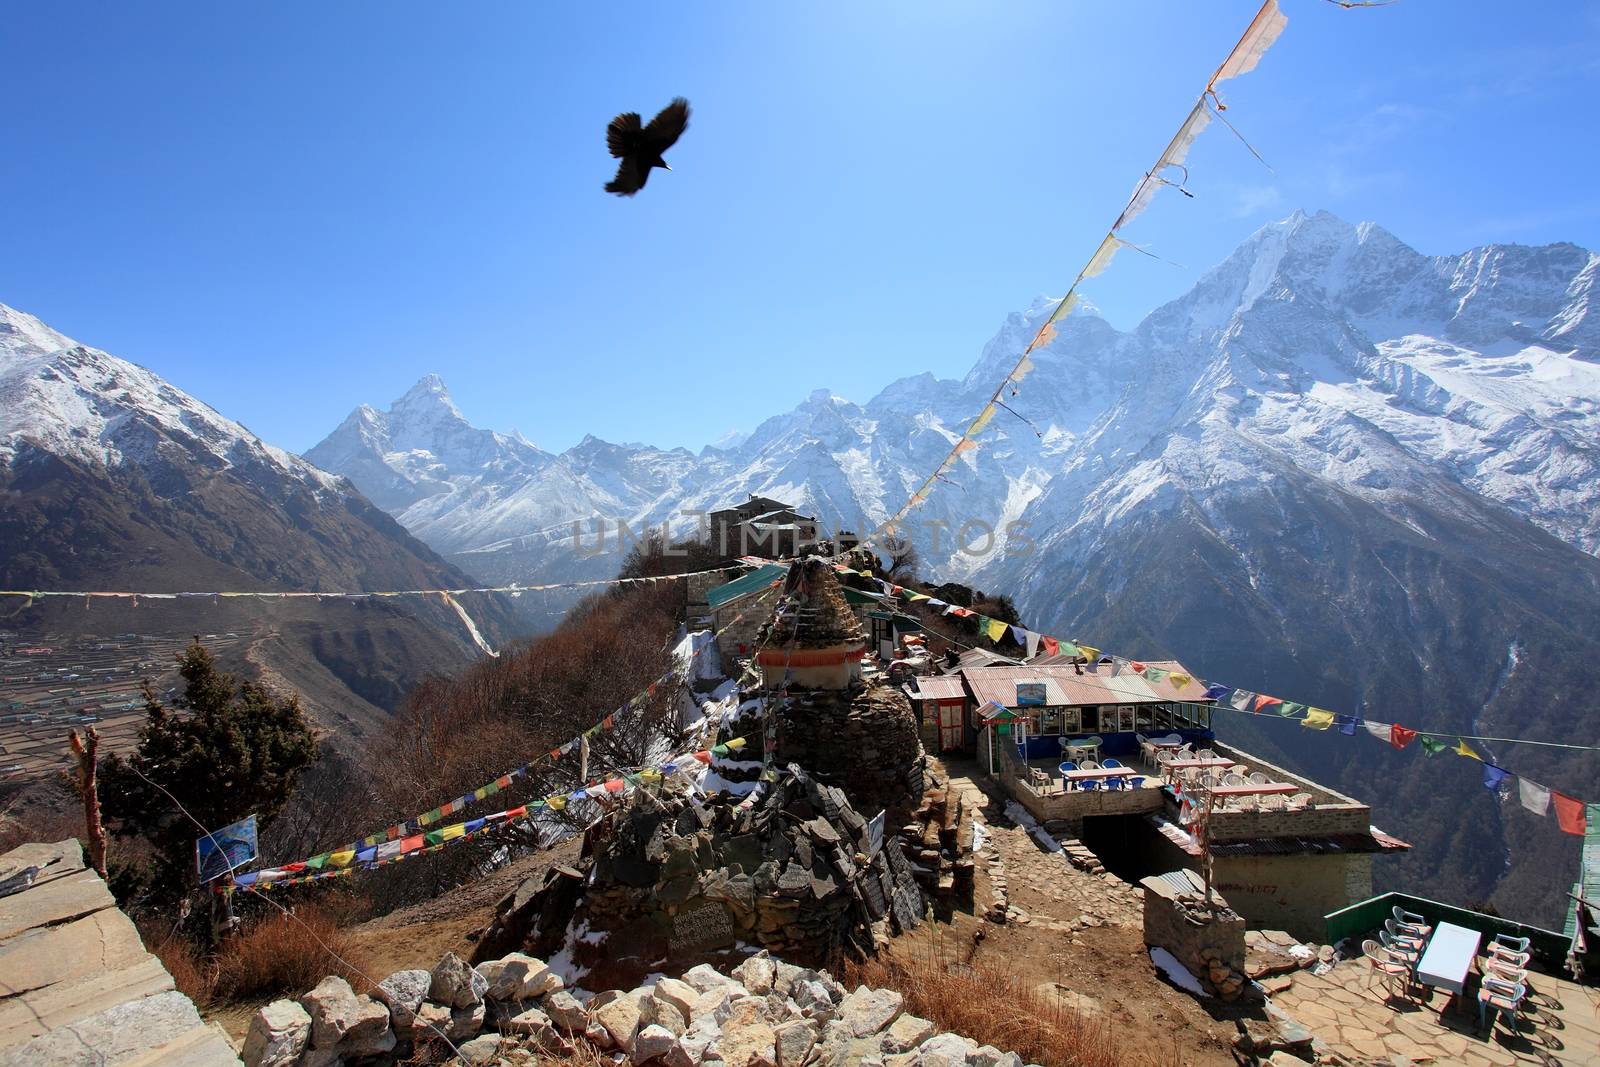 Eagle above the village in the mountains of Himalayas. Nepal